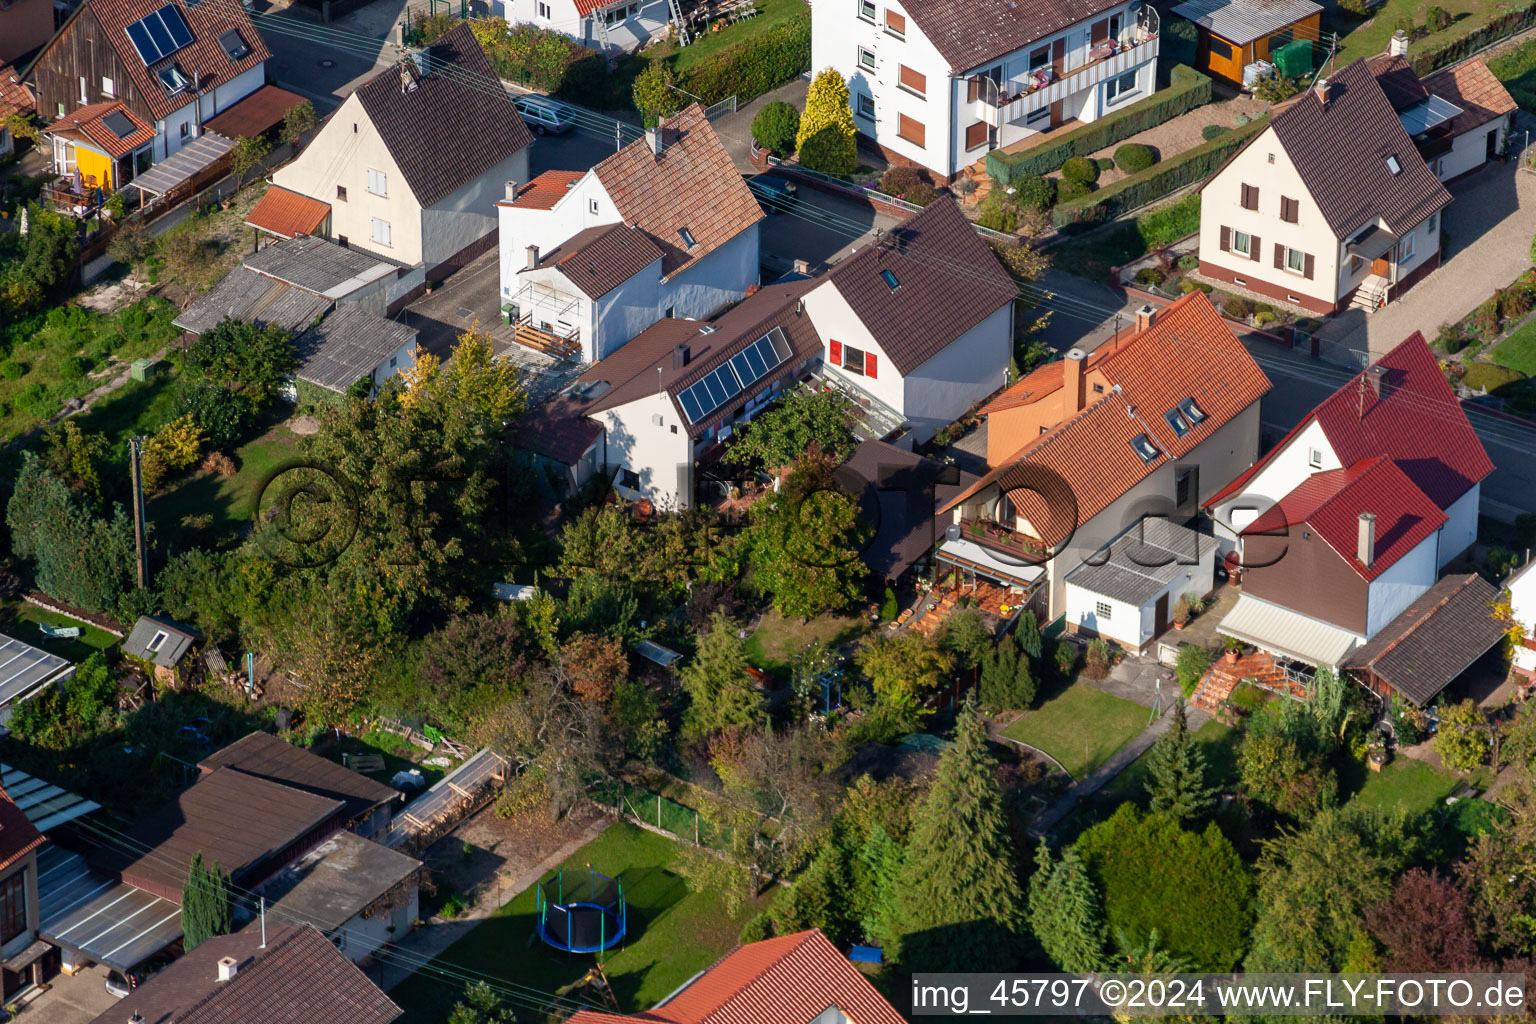 Drone recording of Garden City settlement in Kandel in the state Rhineland-Palatinate, Germany